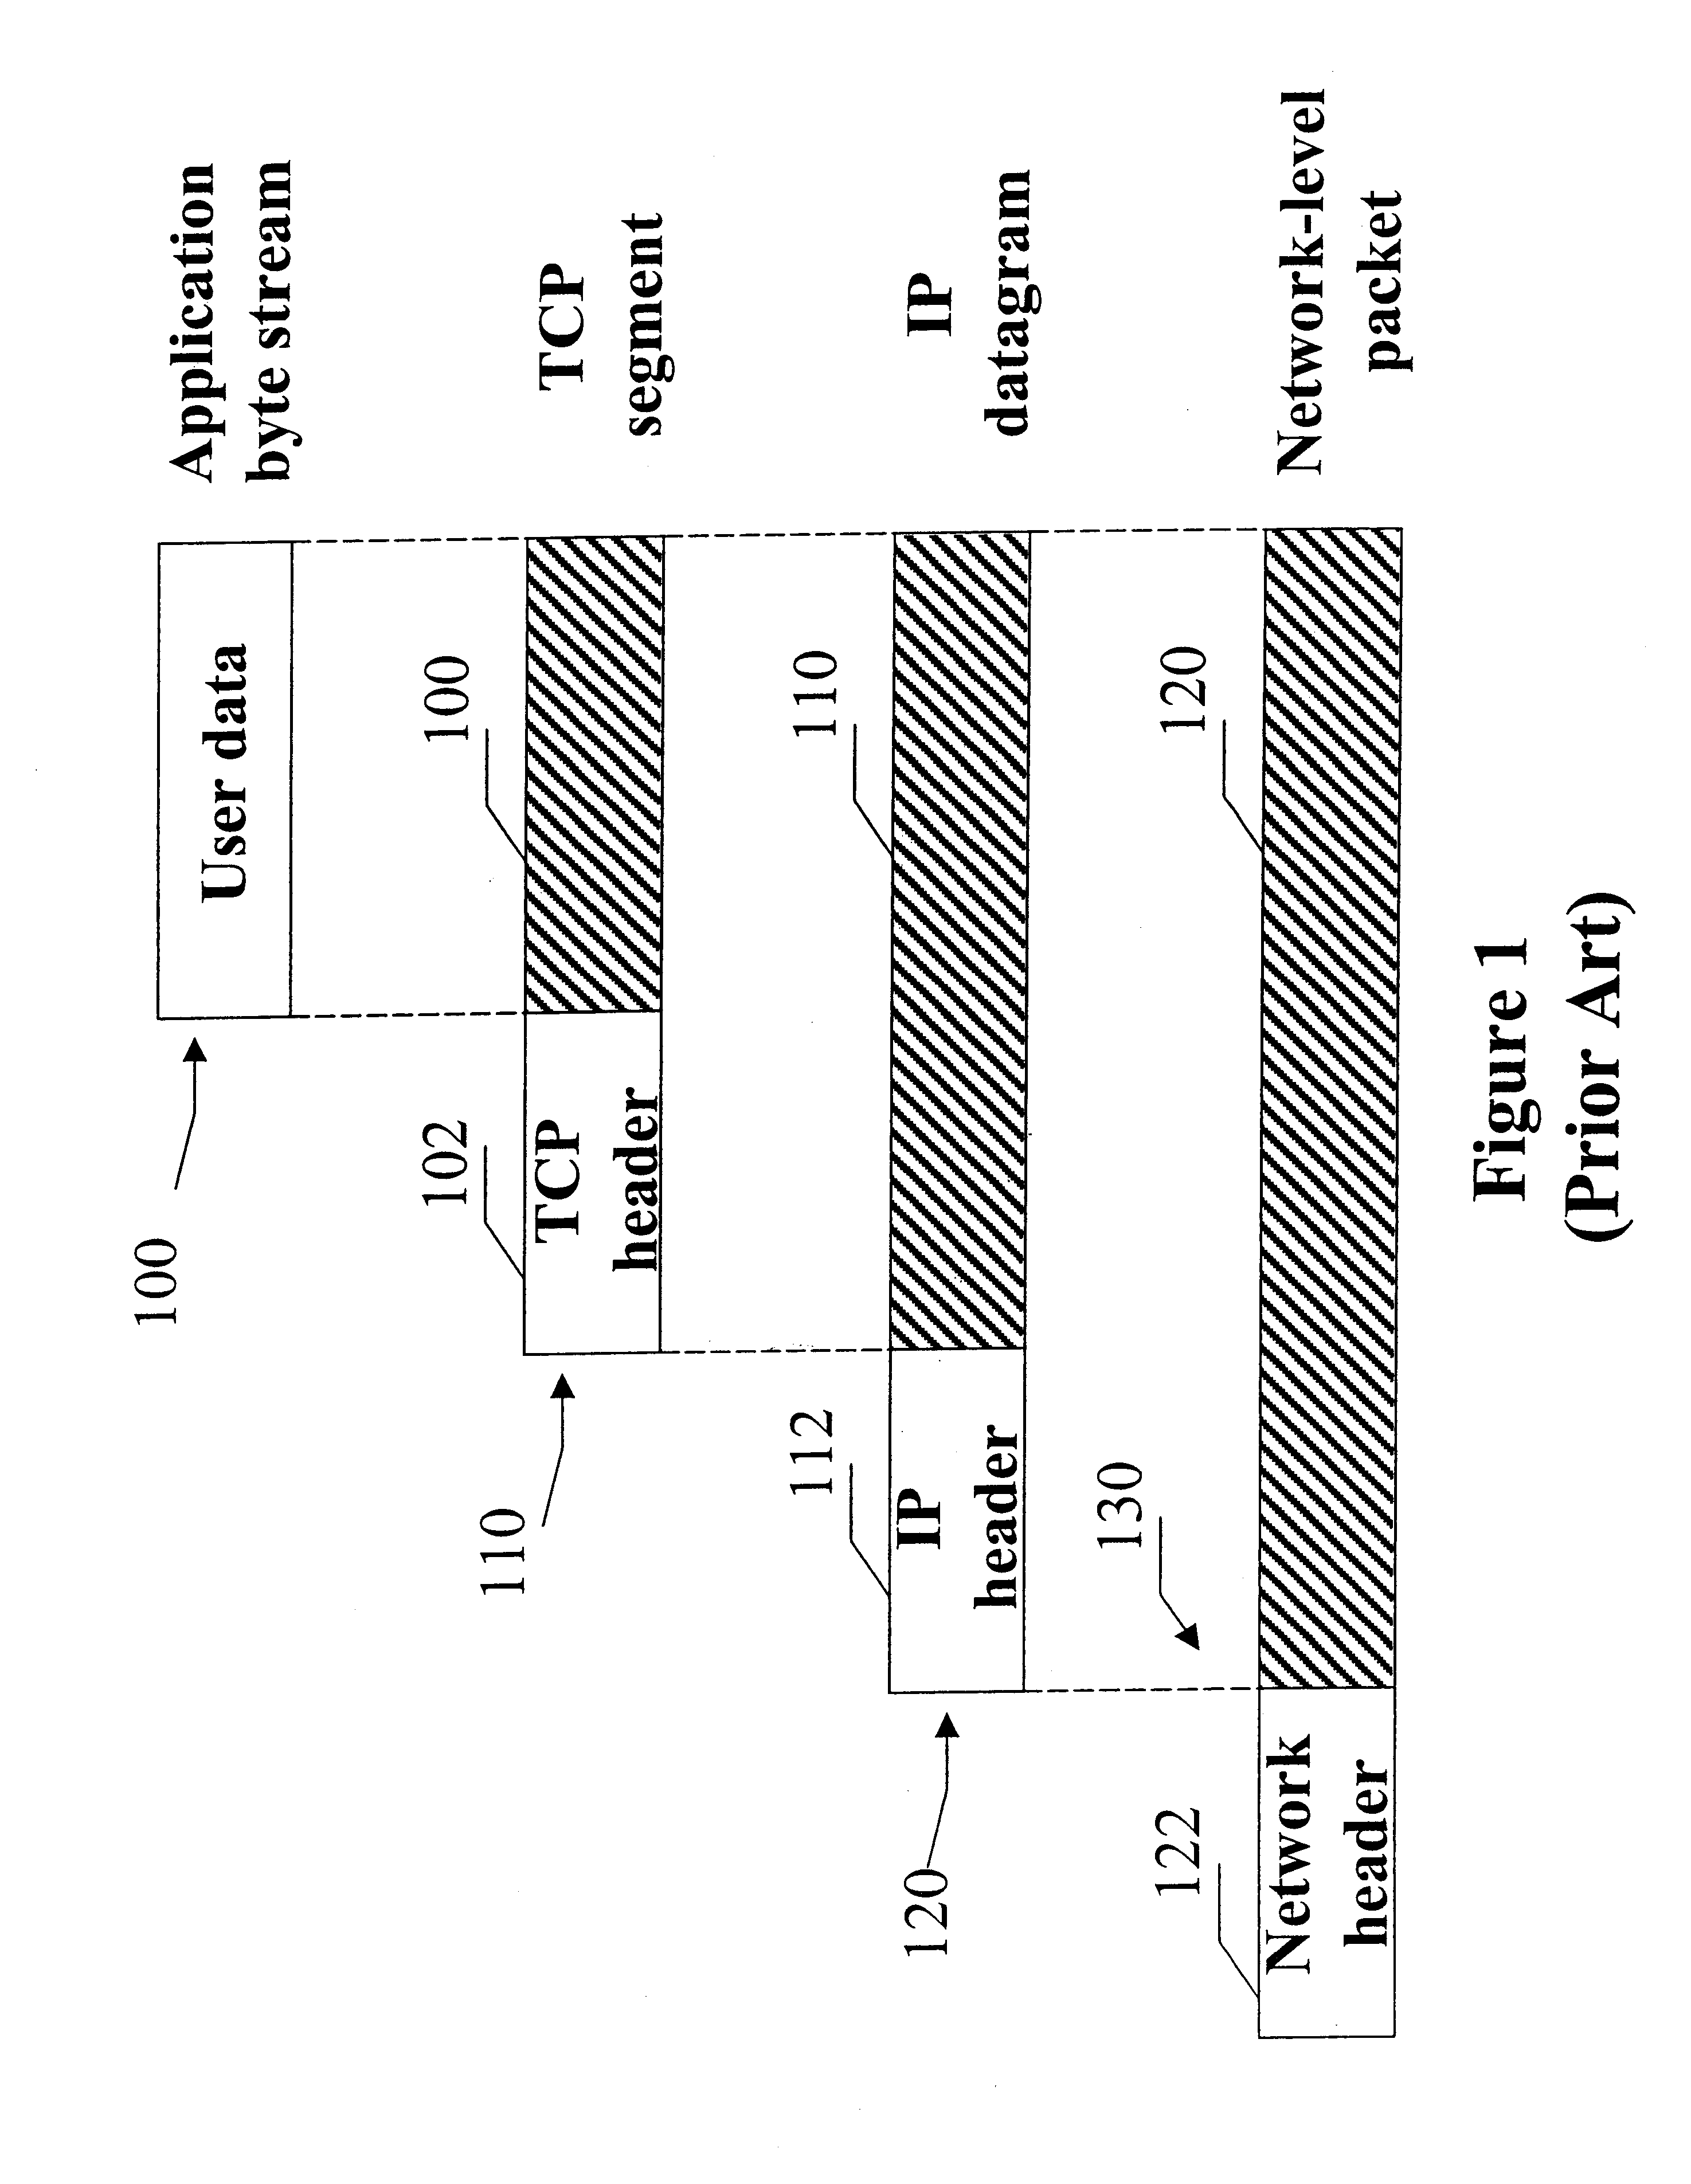 Methods and apparatus for shaping queued packets using a two-dimensional RAM-based search engine